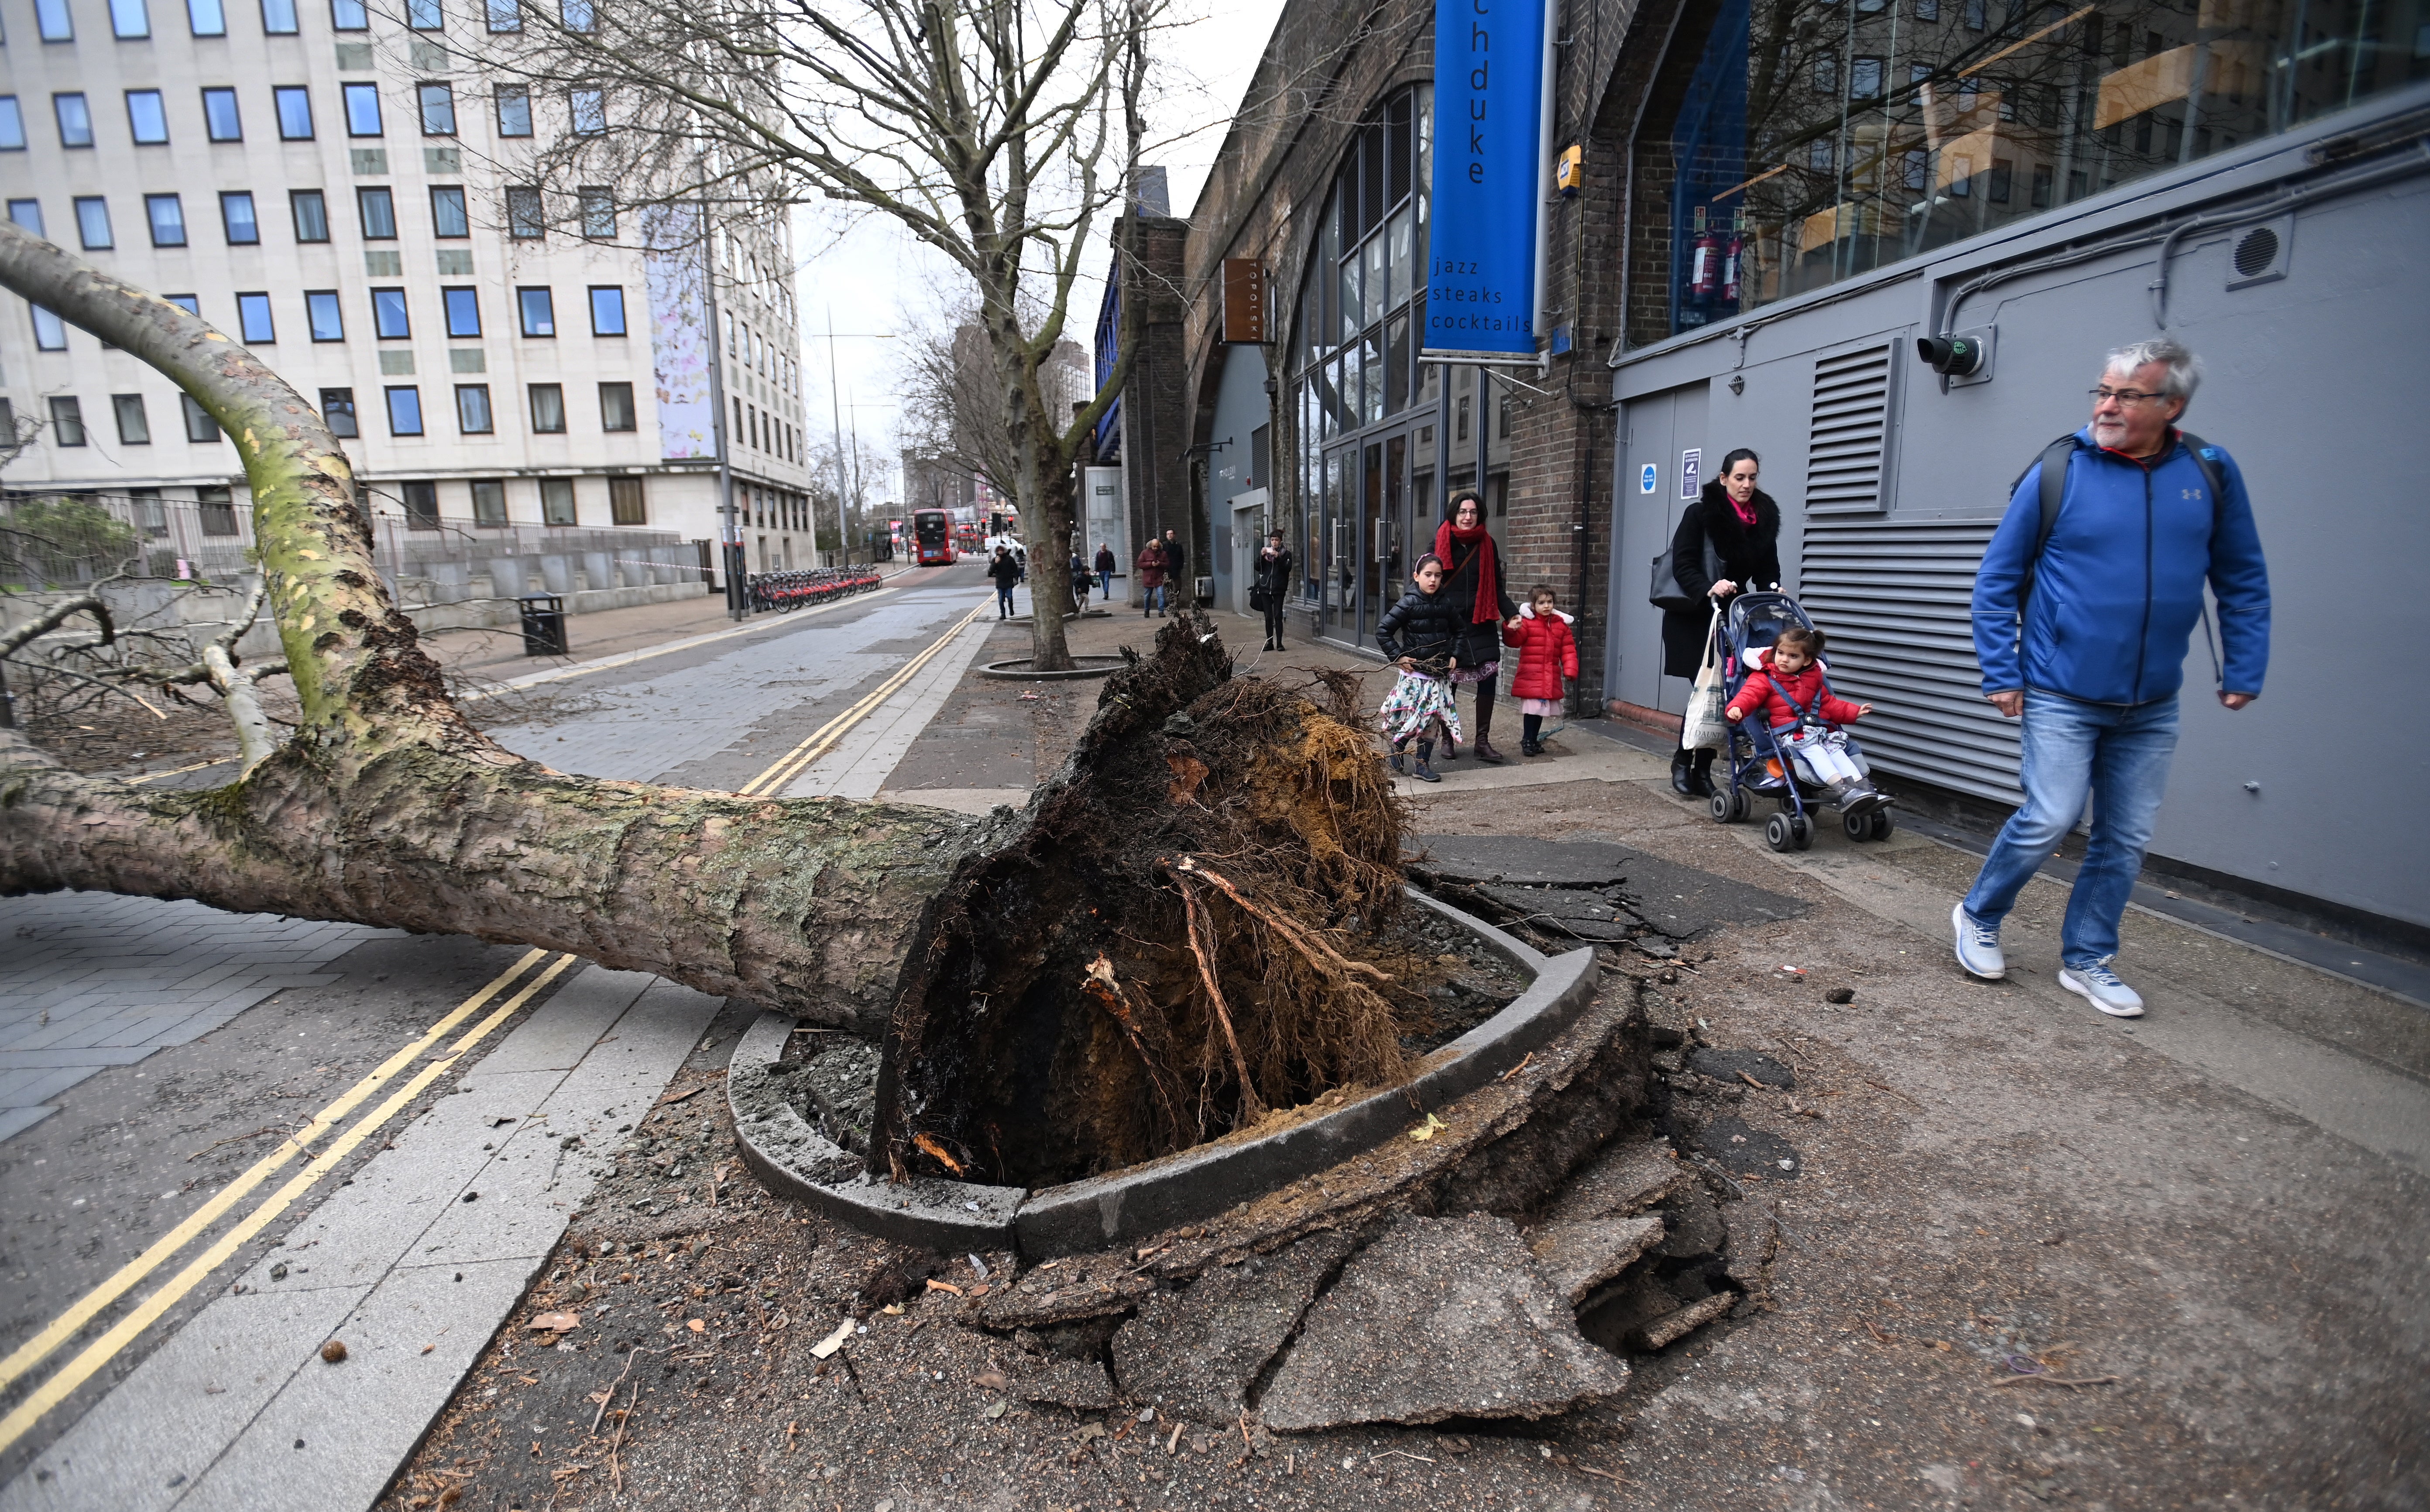 People walk past a fallen tree brought down by strong winds during Storm Eunice in London